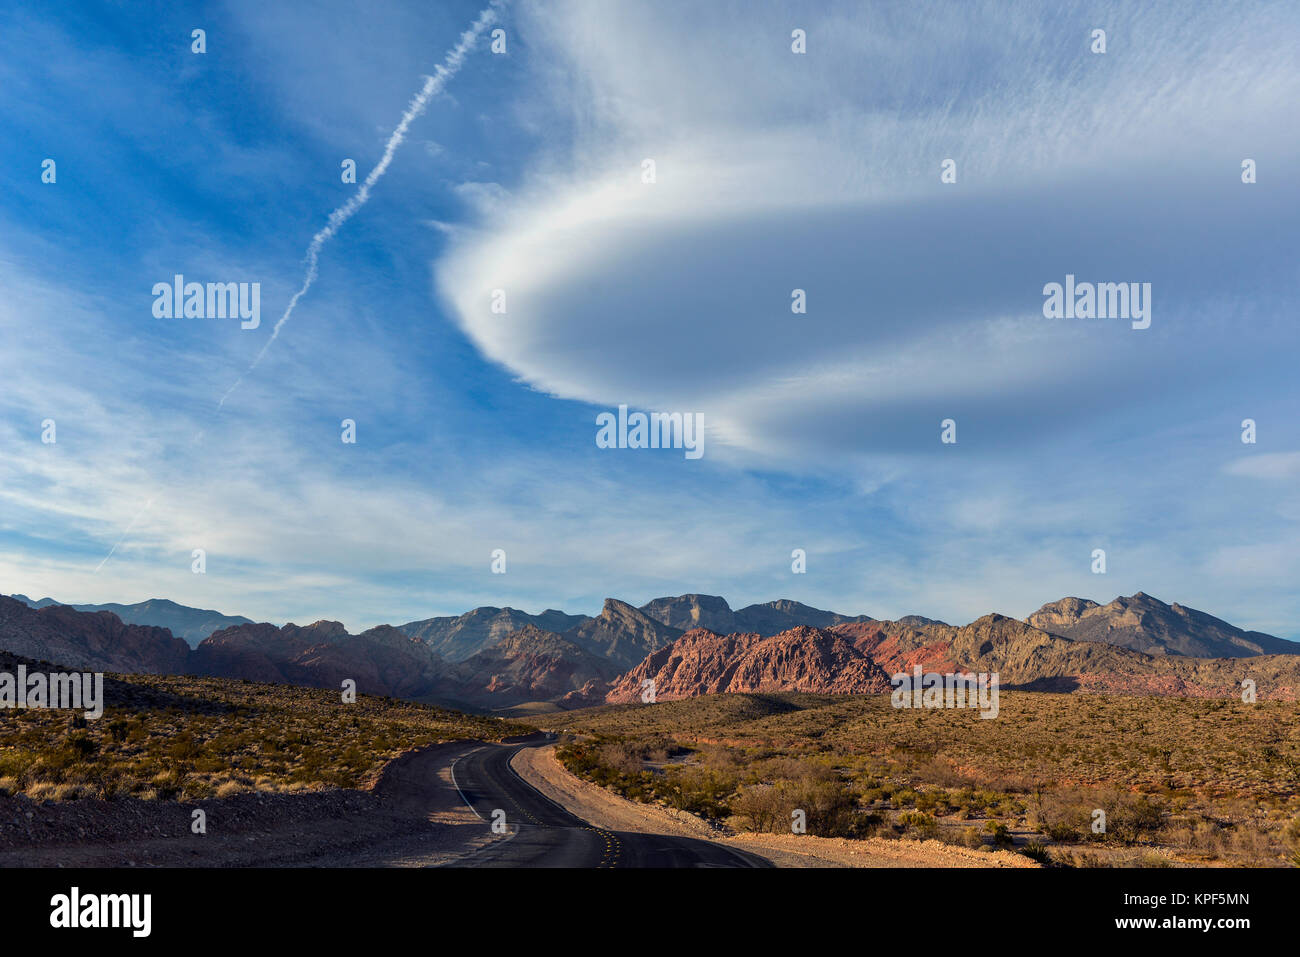 Red Rock Park Nevada landscape with desert, road, lenticular clouds and mountains Stock Photo